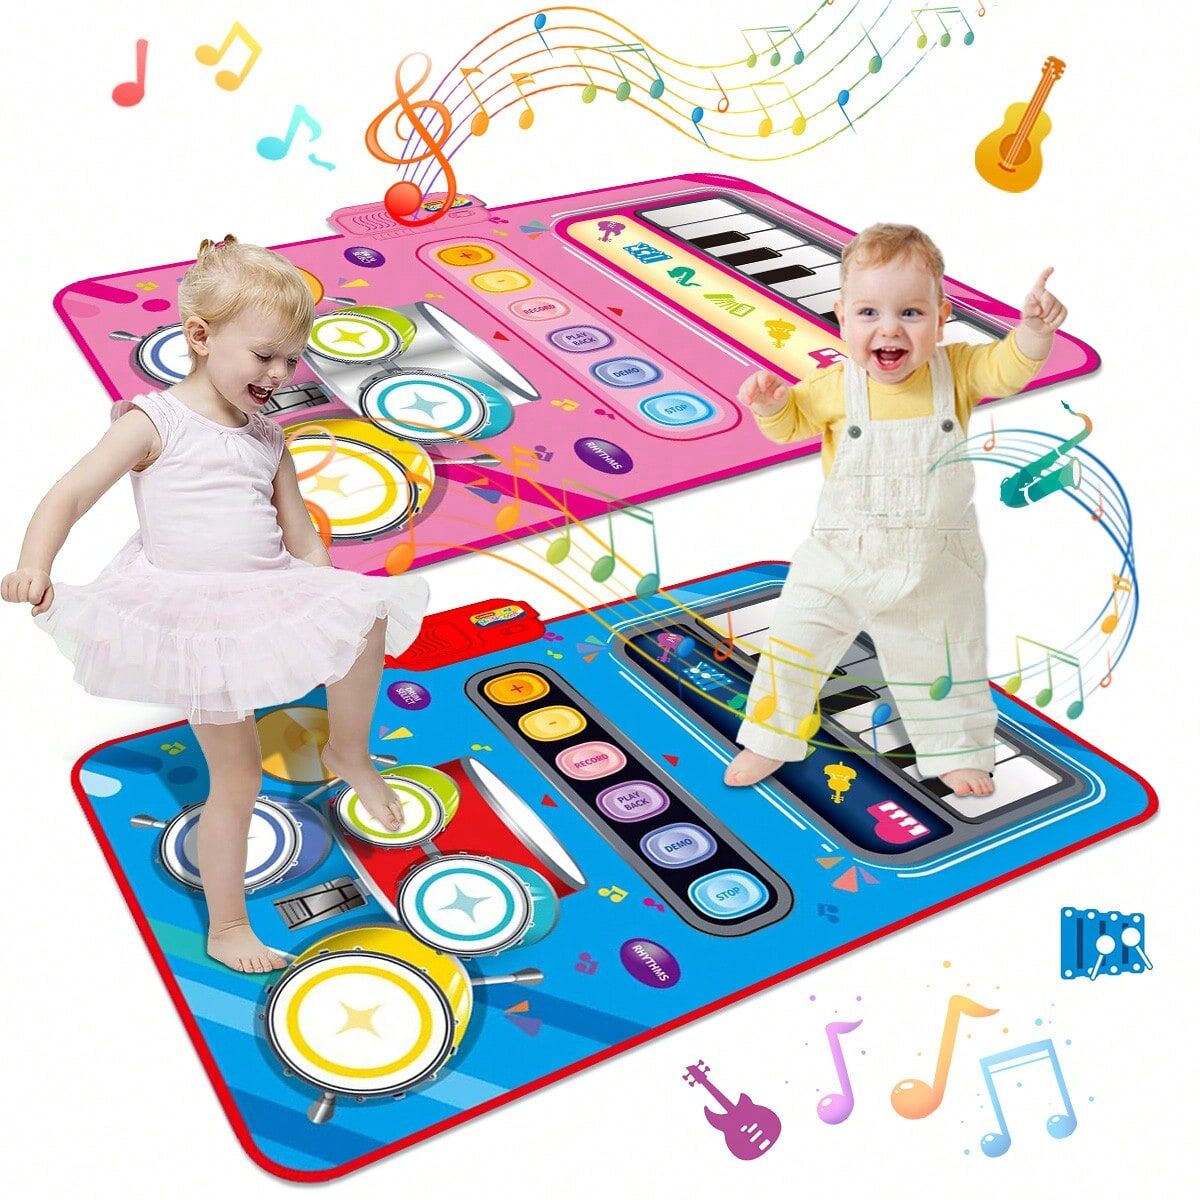 SHEIN 2 In 1 Piano Mat For Kids-Music Sensory Play Mat Piano Keyboard & Jazz Drum MusicTouch Play Carpet With 2 Sticks For Baby Toddlers Instrument Education Gift Random Color 1pcs Multicolor Blue Piano Mat,Pink Piano Mat